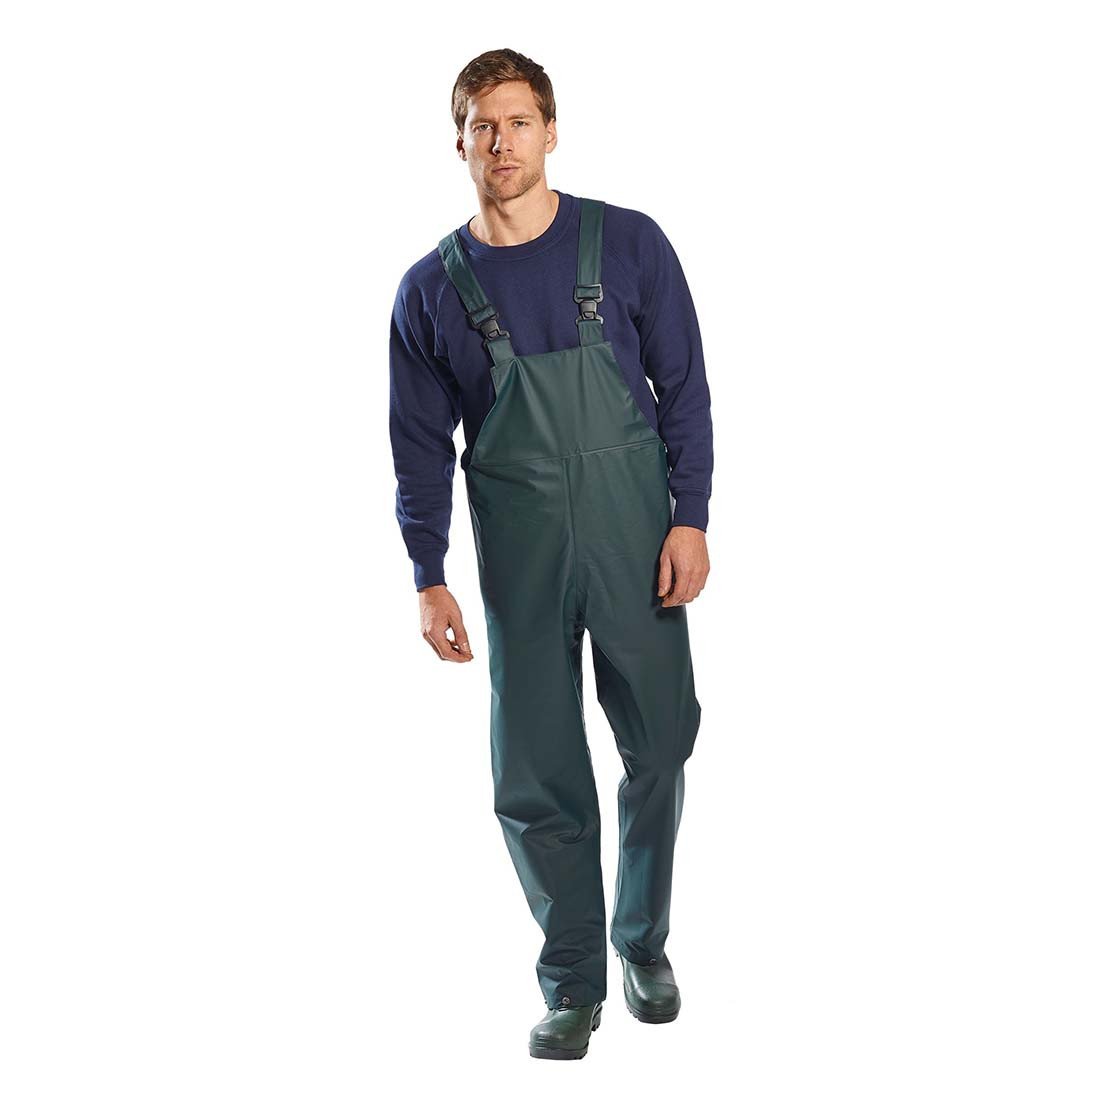 Portwest Sealtex Classic Waterproof Bib and Brace Overall in Navy